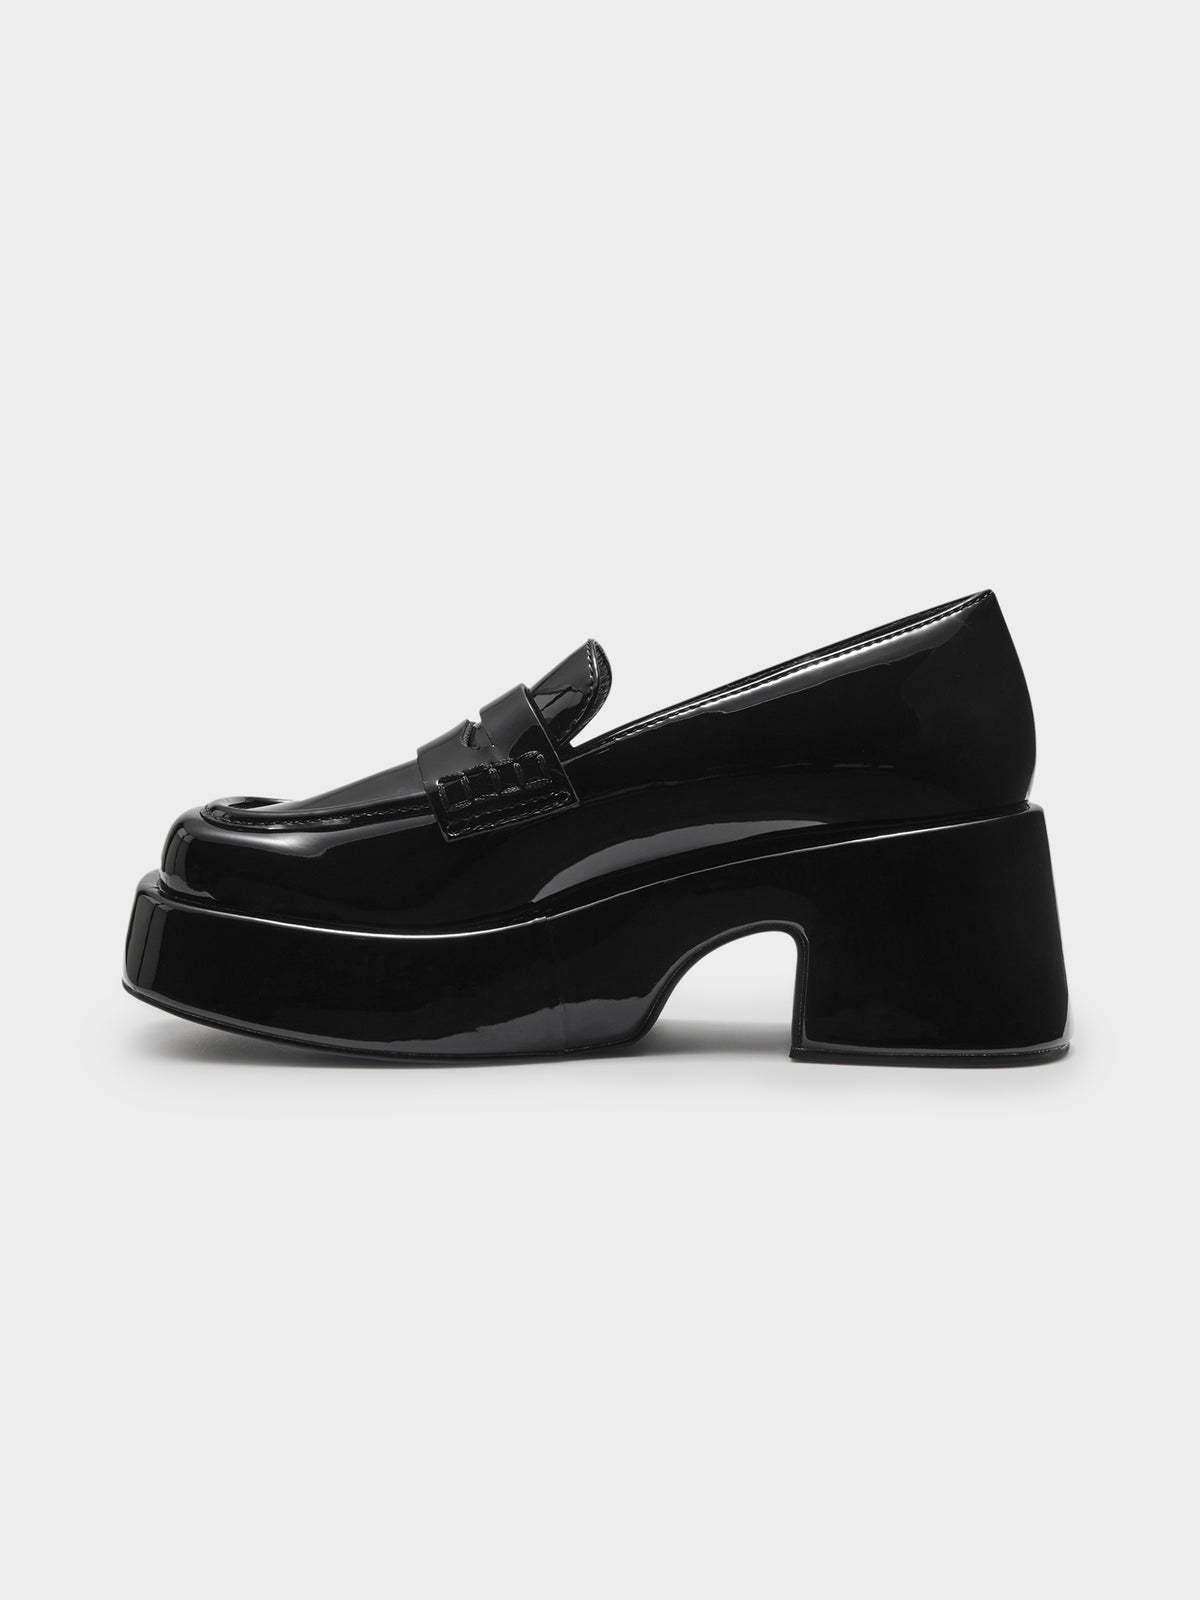 Womens Ella May Ding Rustica Platform Loafers in Black Patent